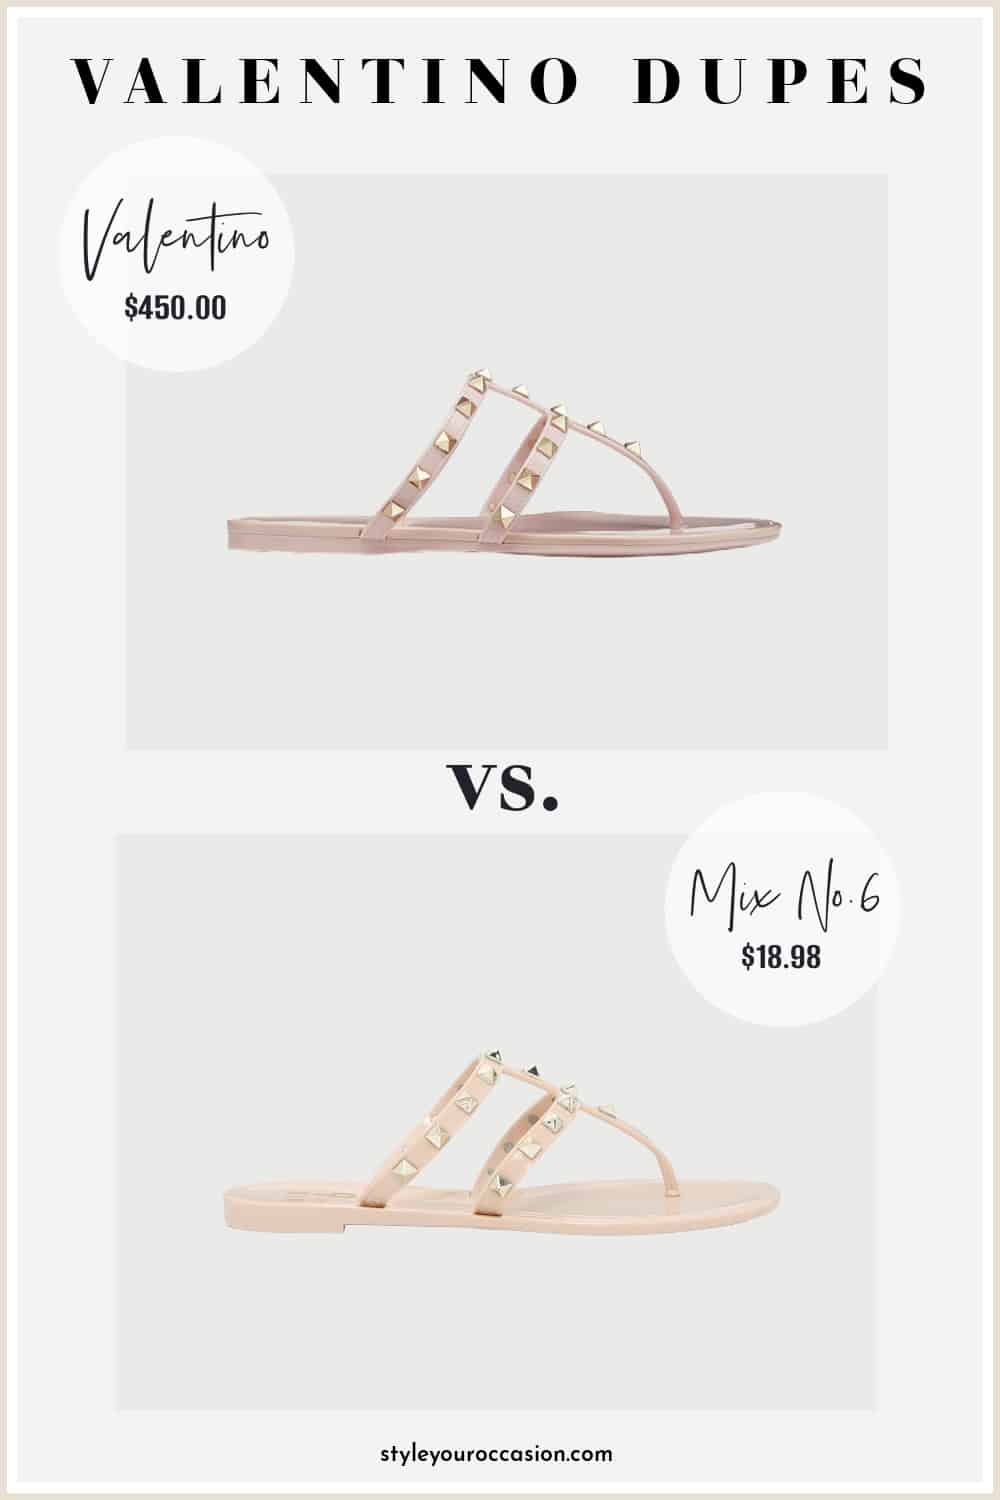 image of a Valentino rockstud jelly sandal and a very similar looking dupe sandal